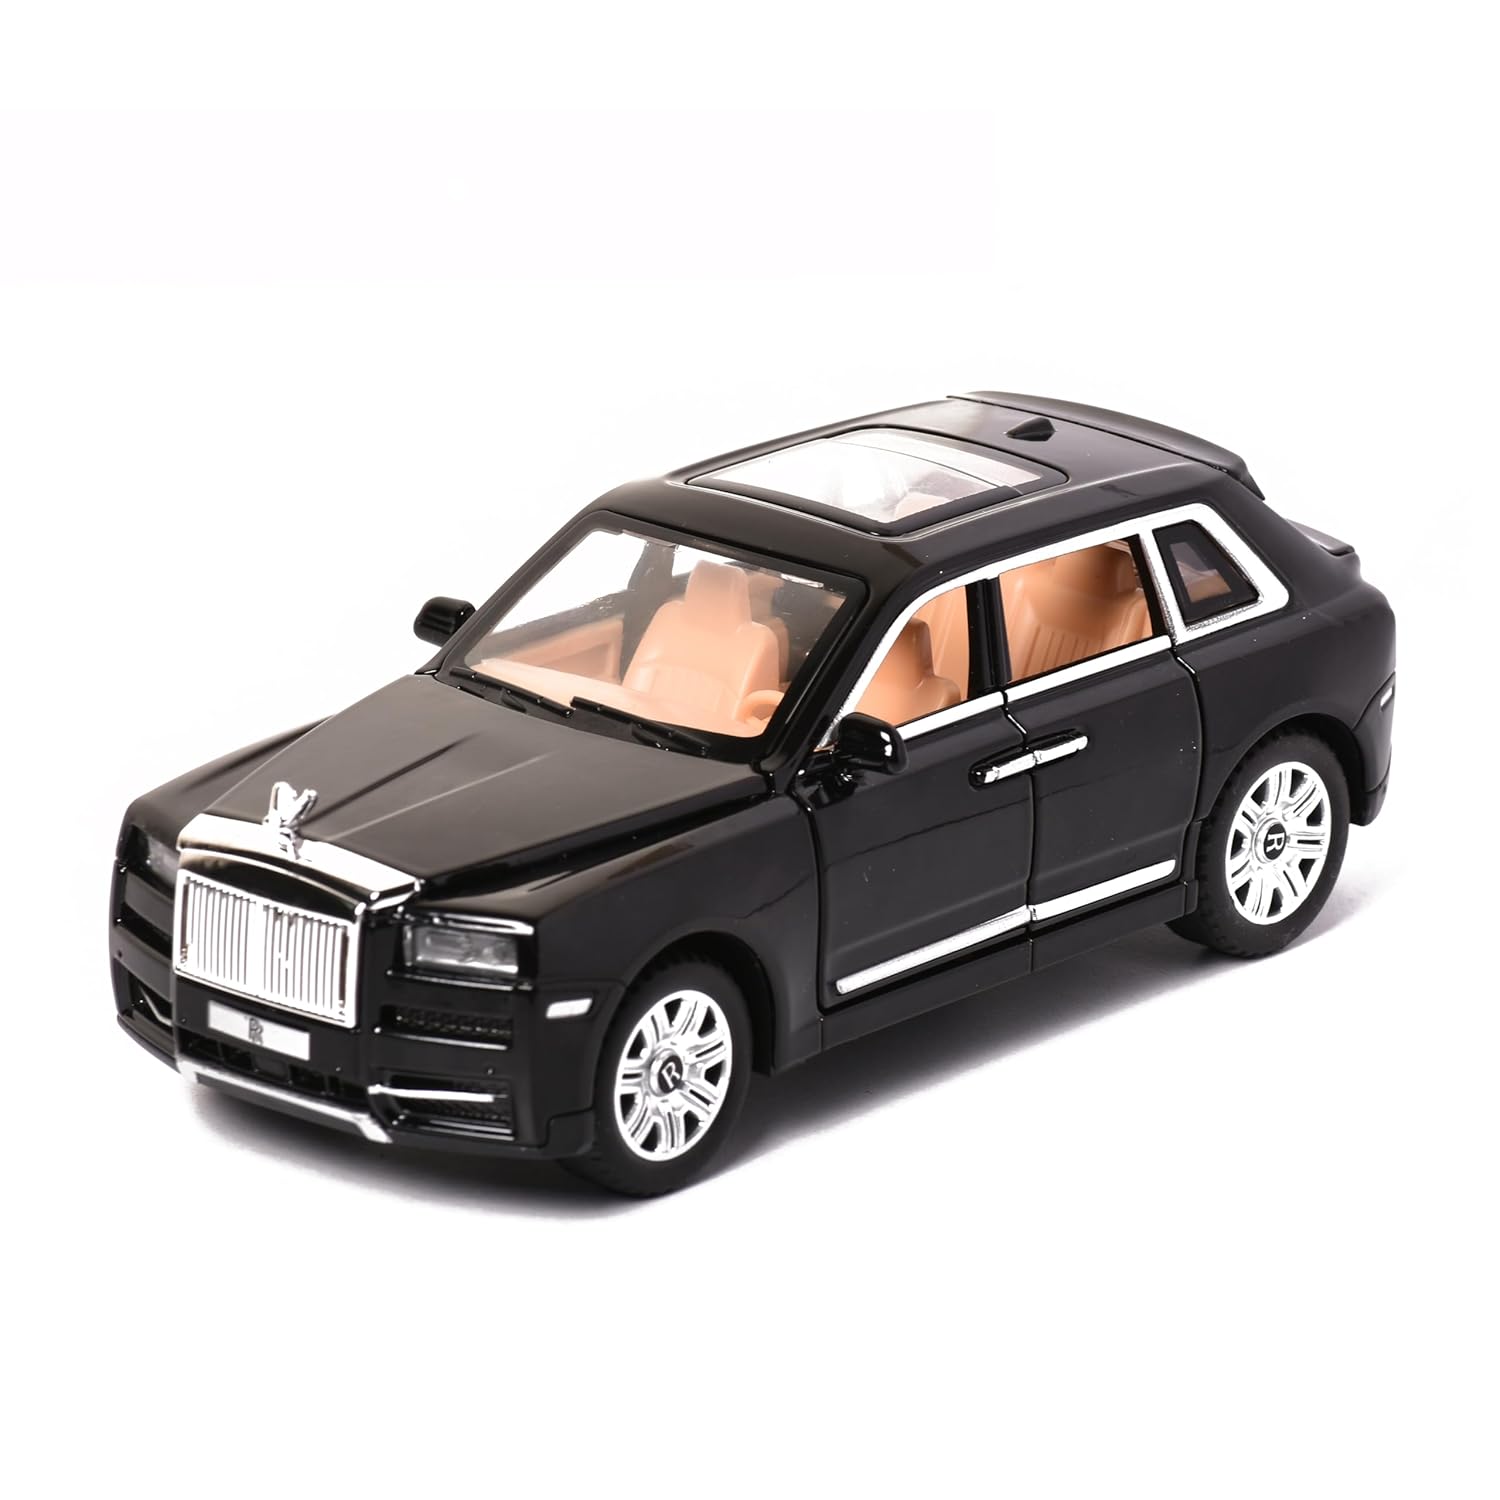 Braintastic Model Diecast Car Toy Vehicle Pull Back Friction Car with Openable Doors Light & Music Toys for Kids Age 3+ Years (Rolls Royce Black)